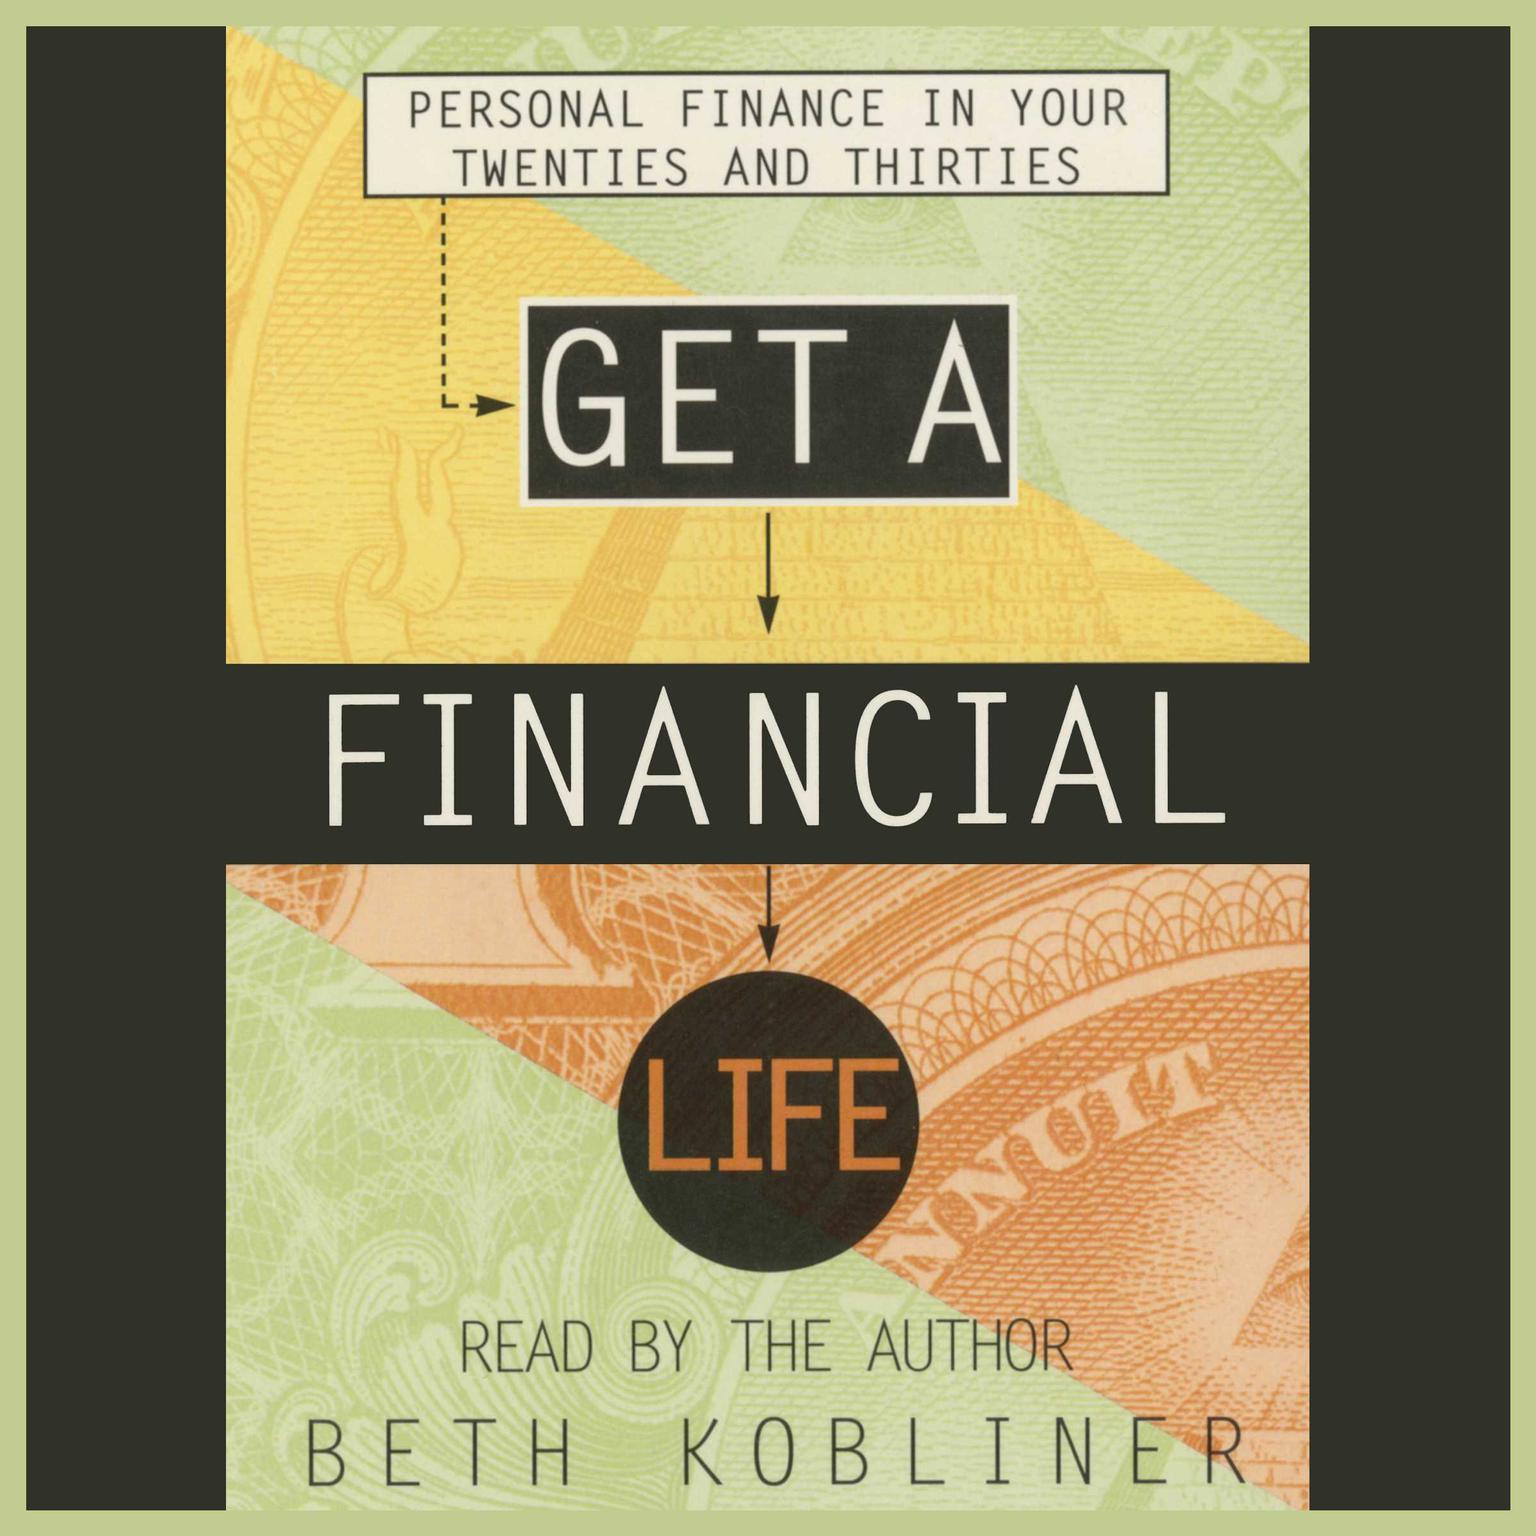 Get A Financial Life (Abridged): Personal Finance in Your Twenties and Thirties Audiobook, by Beth Kobliner